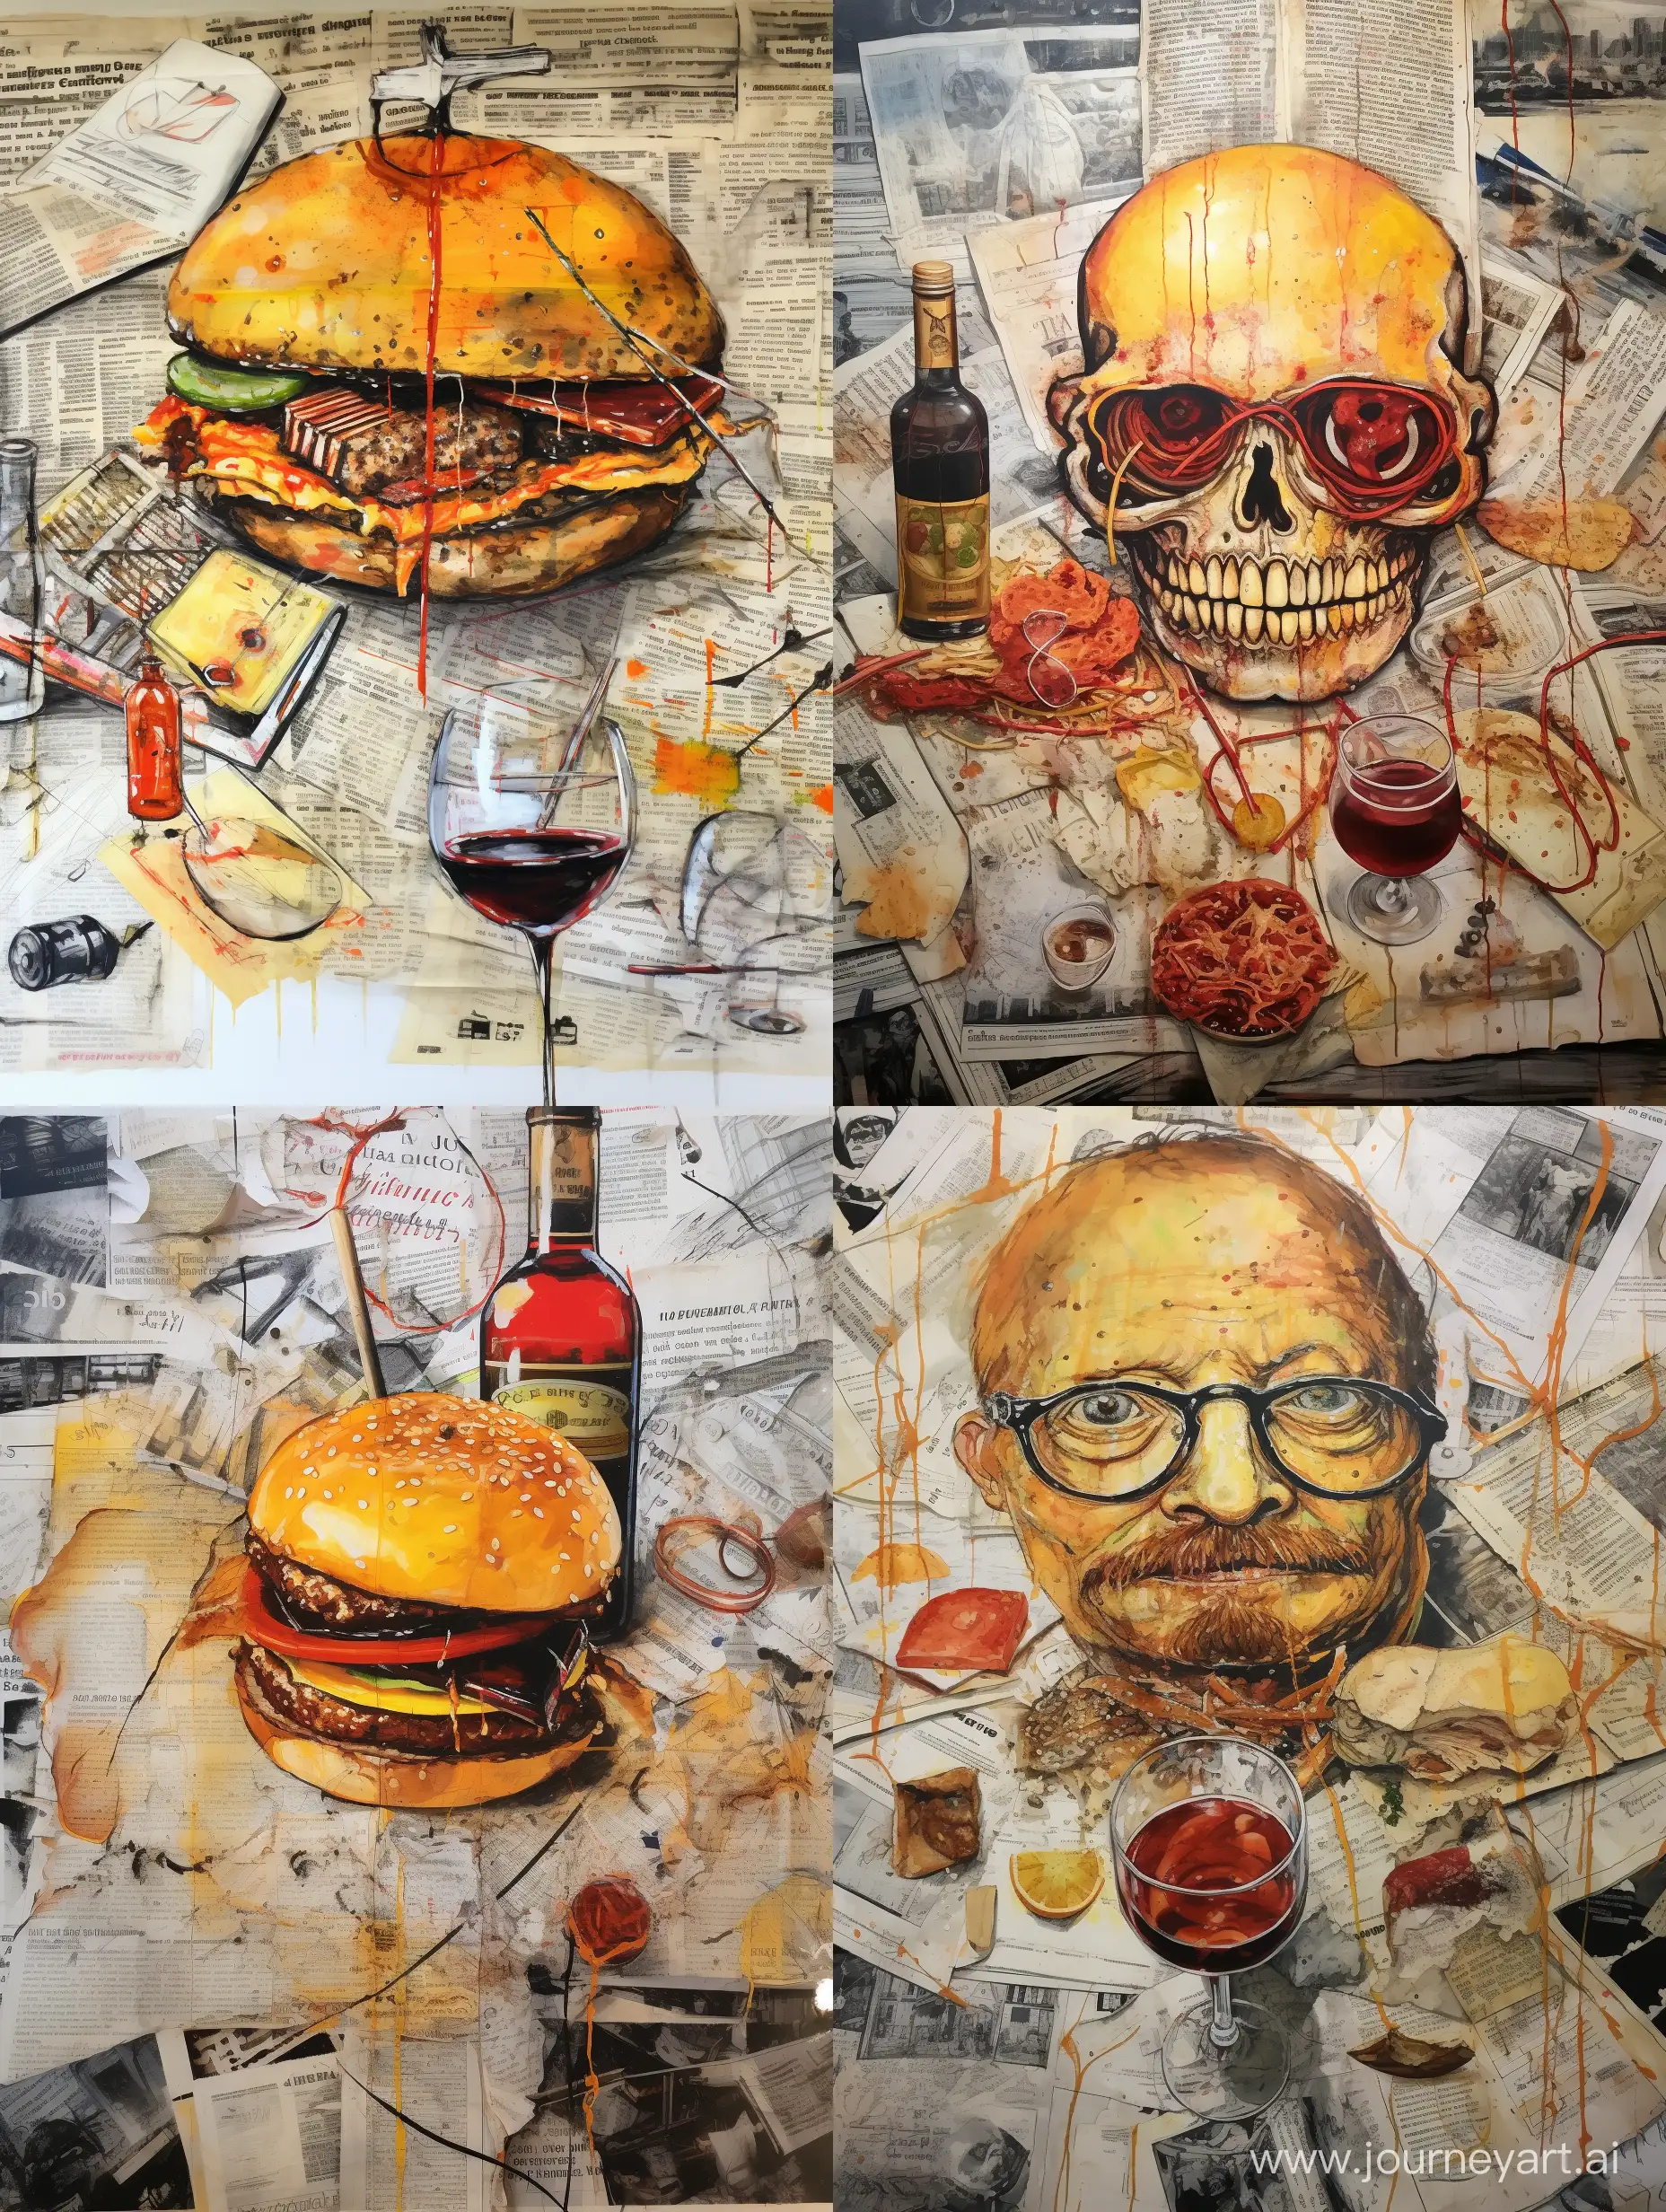 big fat burger with a half bitten medal on top, fries on a side. ketchup and mustard stains, cigarette butts lying around, big square glass of bourbon nearby, everything is standing on pages of manuscipt, view from above, no background, ralph steadman style